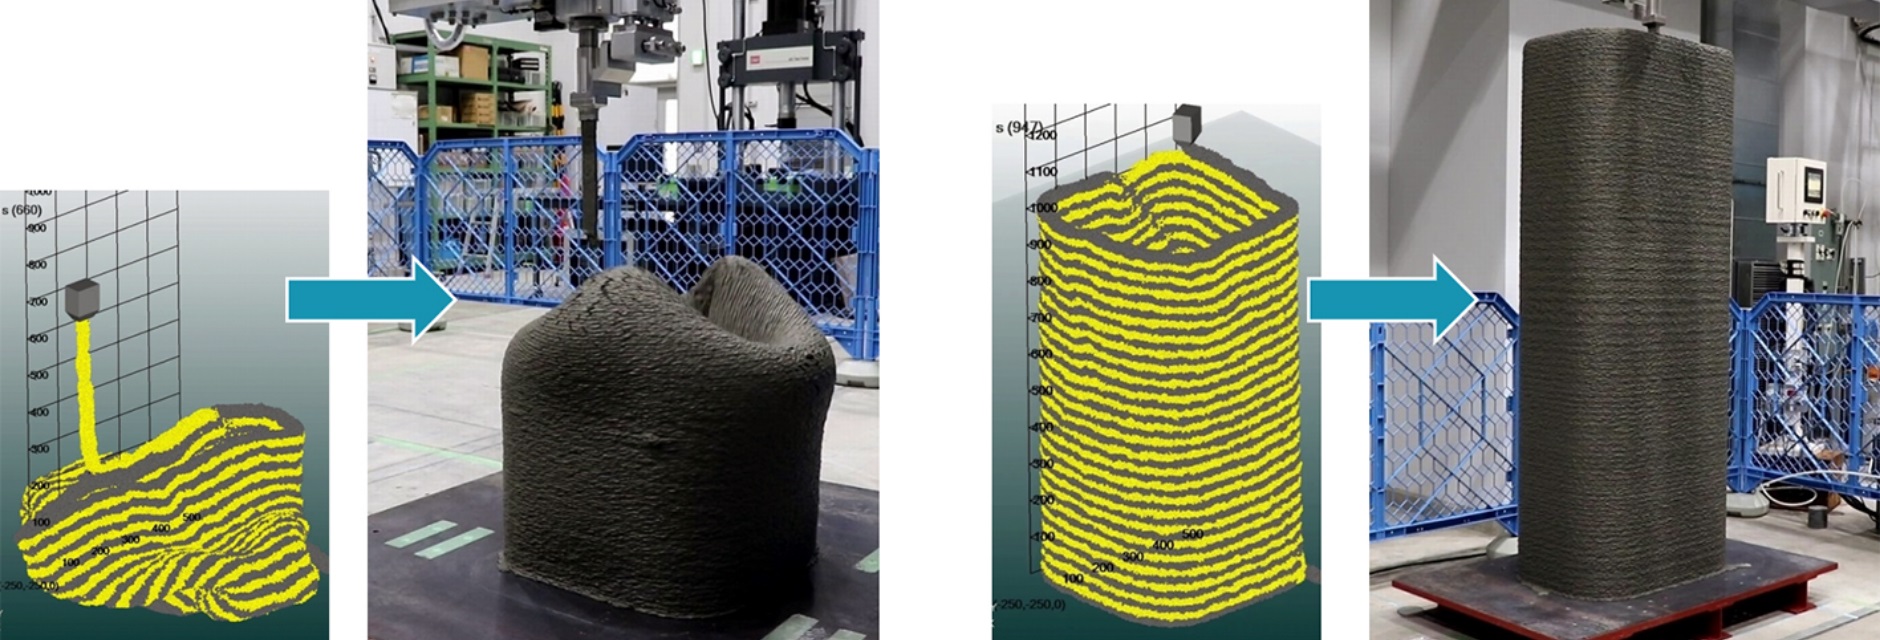 Layering simulation to explore material properties and repeated 3D printing tests were used to narrow down the materials that could be layered to high heights.  